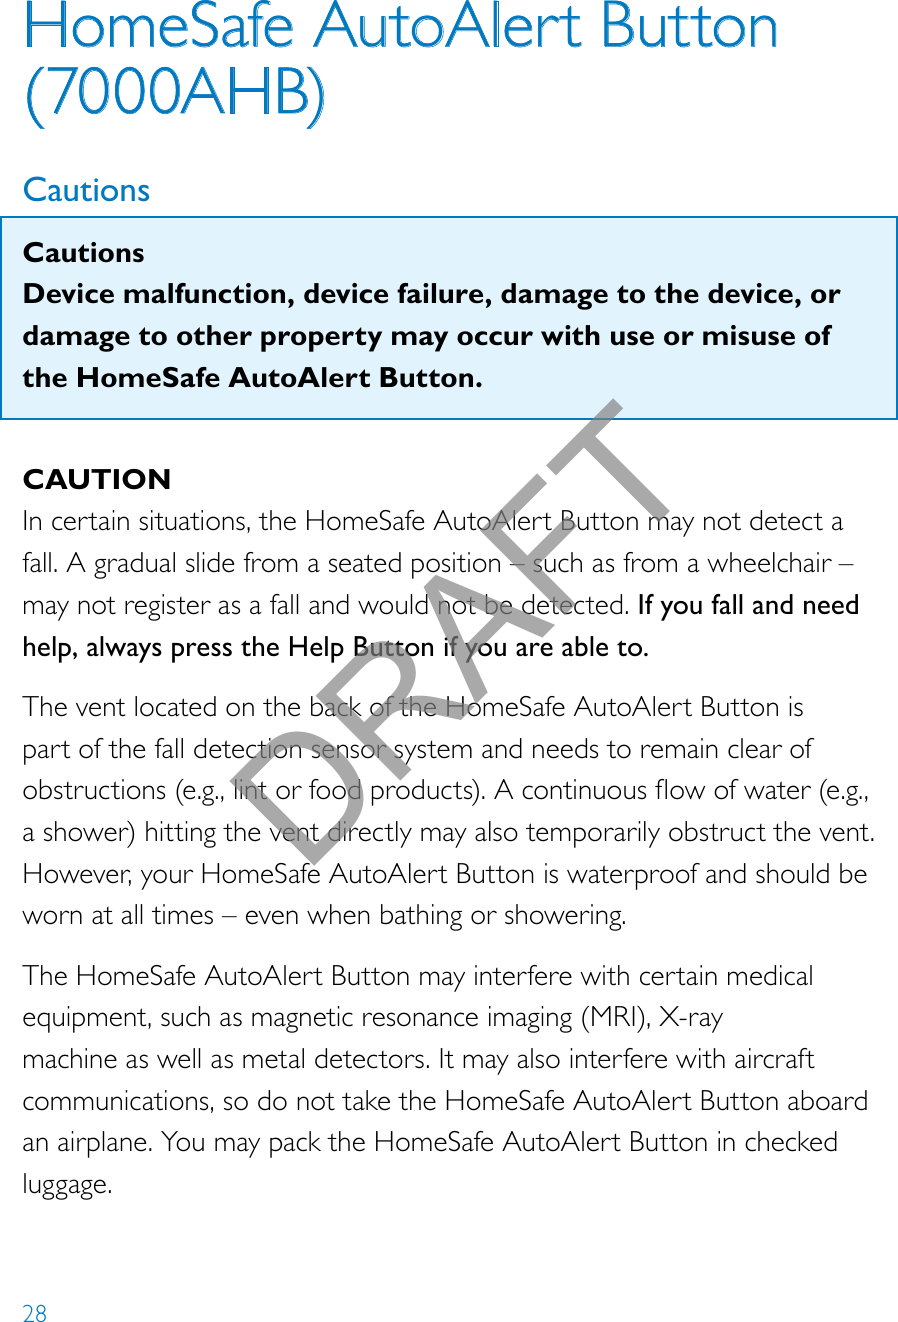 28HomeSafe AutoAlert Button (7000AHB)CautionsCautionsDevice malfunction, device failure, damage to the device, or damage to other property may occur with use or misuse of the HomeSafe AutoAlert Button.CAUTIONIn certain situations, the HomeSafe AutoAlert Button may not detect a fall. A gradual slide from a seated position – such as from a wheelchair – may not register as a fall and would not be detected. If you fall and need help, always press the Help Button if you are able to.The vent located on the back of the HomeSafe AutoAlert Button is part of the fall detection sensor system and needs to remain clear of obstructions(e.g.,lintorfoodproducts).Acontinuousowofwater(e.g.,a shower) hitting the vent directly may also temporarily obstruct the vent. However, your HomeSafe AutoAlert Button is waterproof and should be worn at all times – even when bathing or showering.The HomeSafe AutoAlert Button may interfere with certain medical equipment, such as magnetic resonance imaging (MRI), X-ray machine as well as metal detectors. It may also interfere with aircraft communications, so do not take the HomeSafe AutoAlert Button aboard an airplane. You may pack the HomeSafe AutoAlert Button in checked luggage.DRAFT